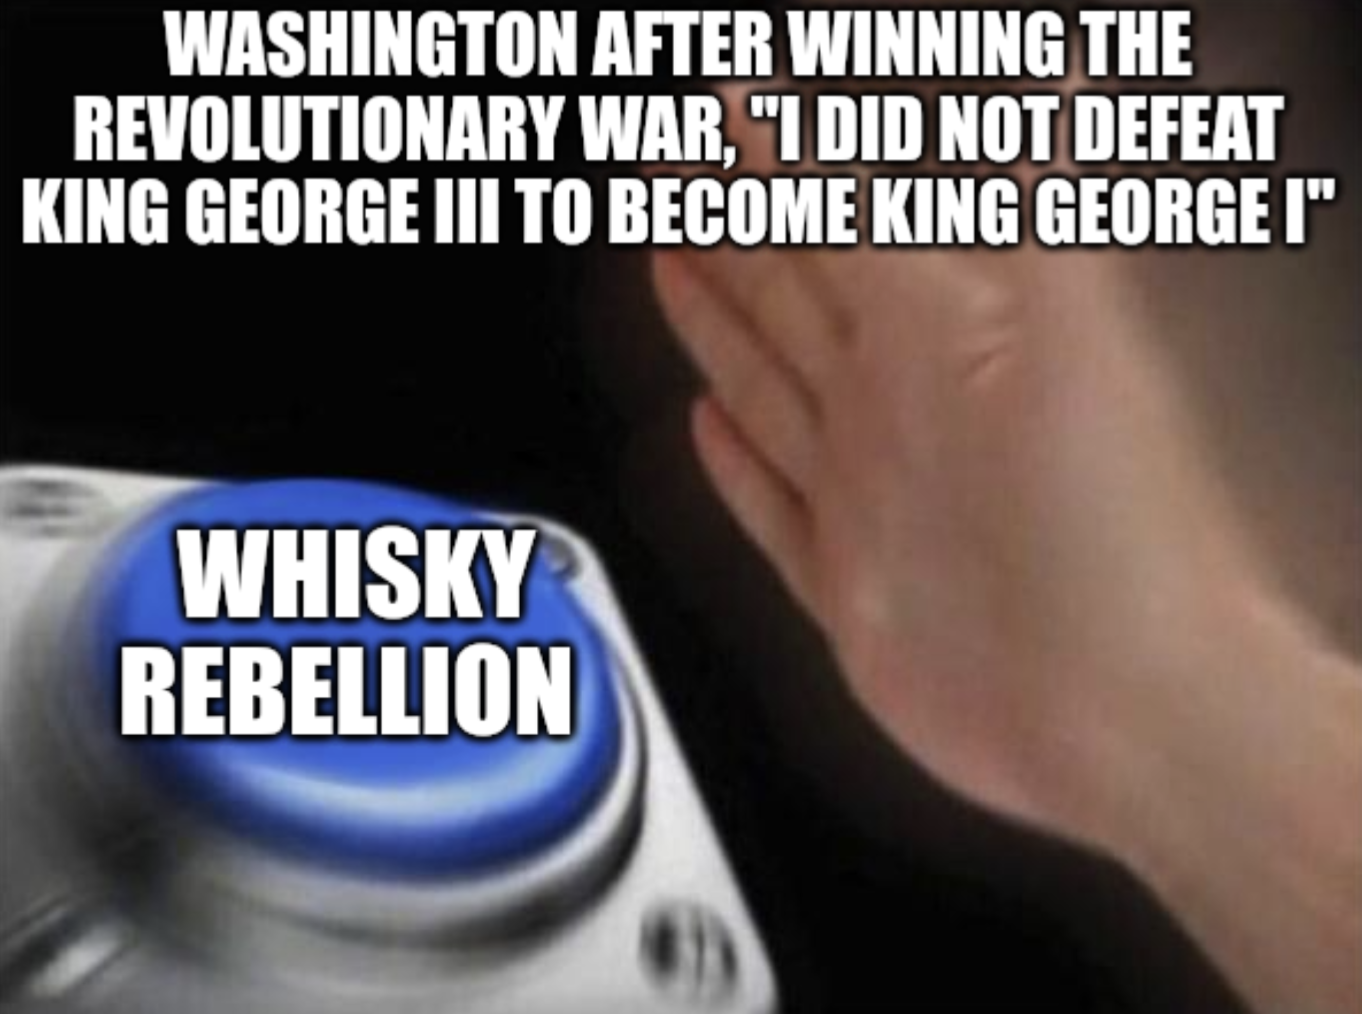 Washington forgetting what he promised to the nation